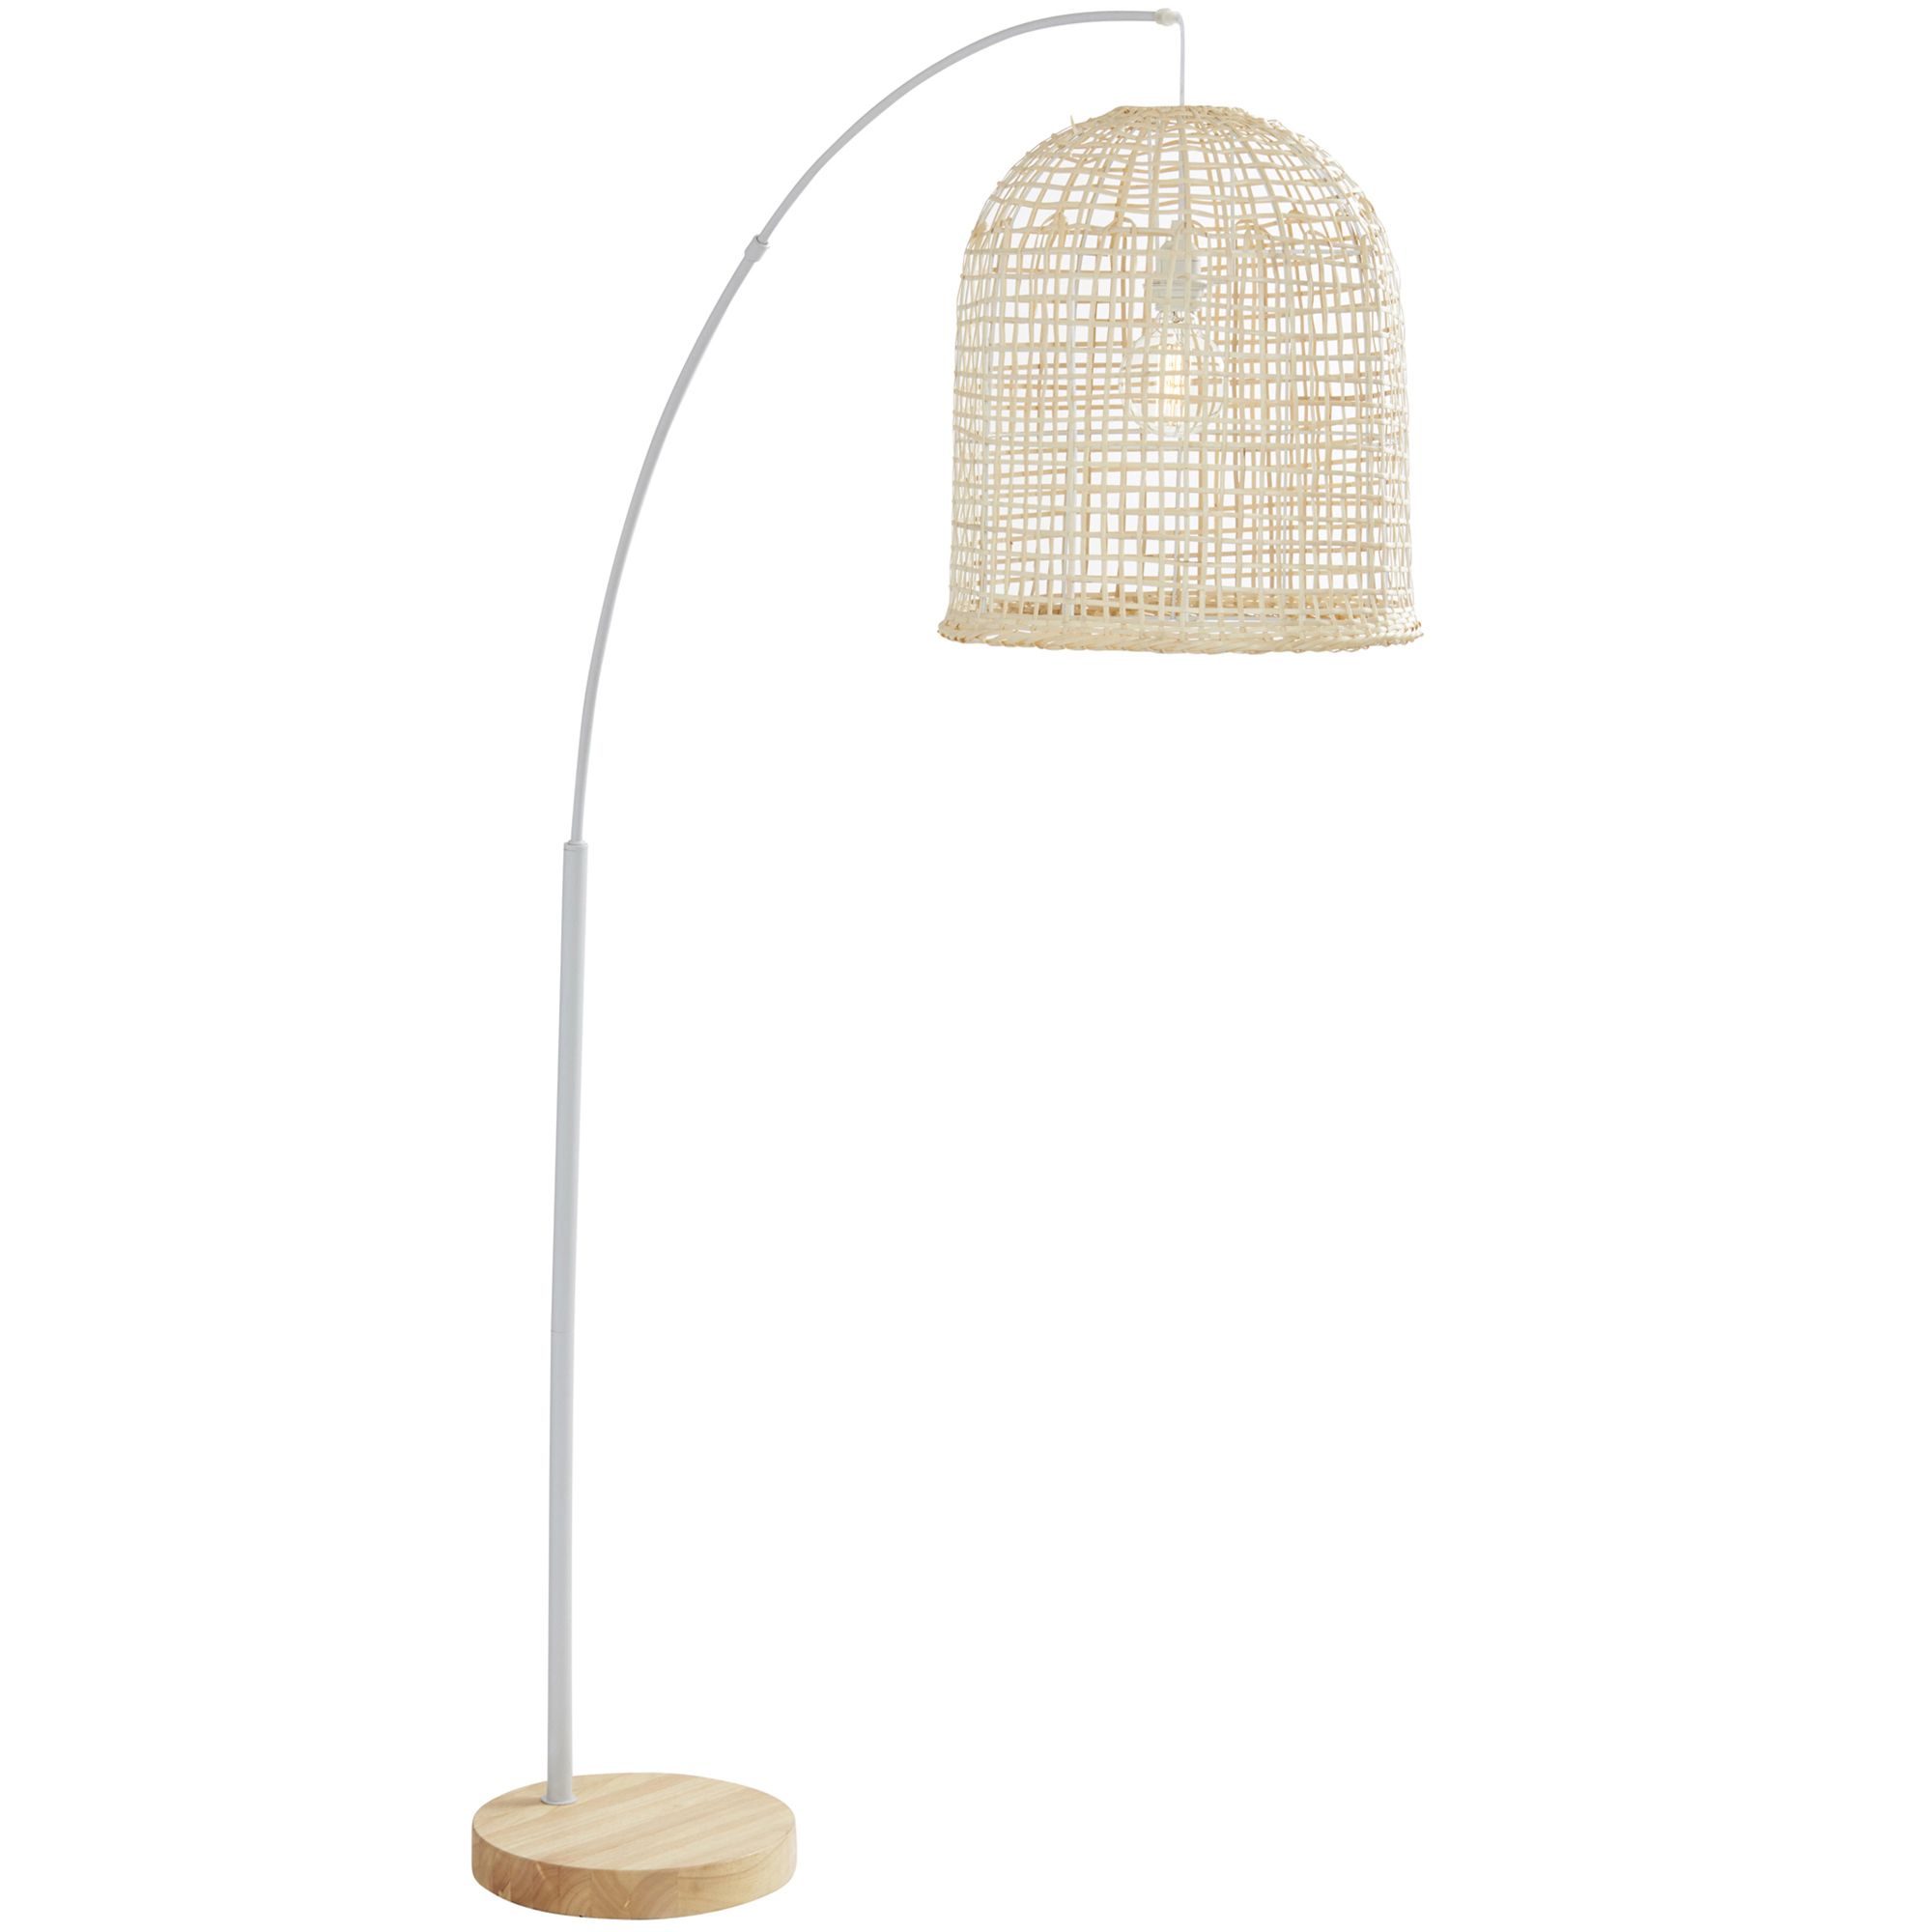 The Home Collective Metal & Rattan Weave Floor Lamp | Temple & Webster Pertaining To Woven Cane Floor Lamps (View 5 of 20)